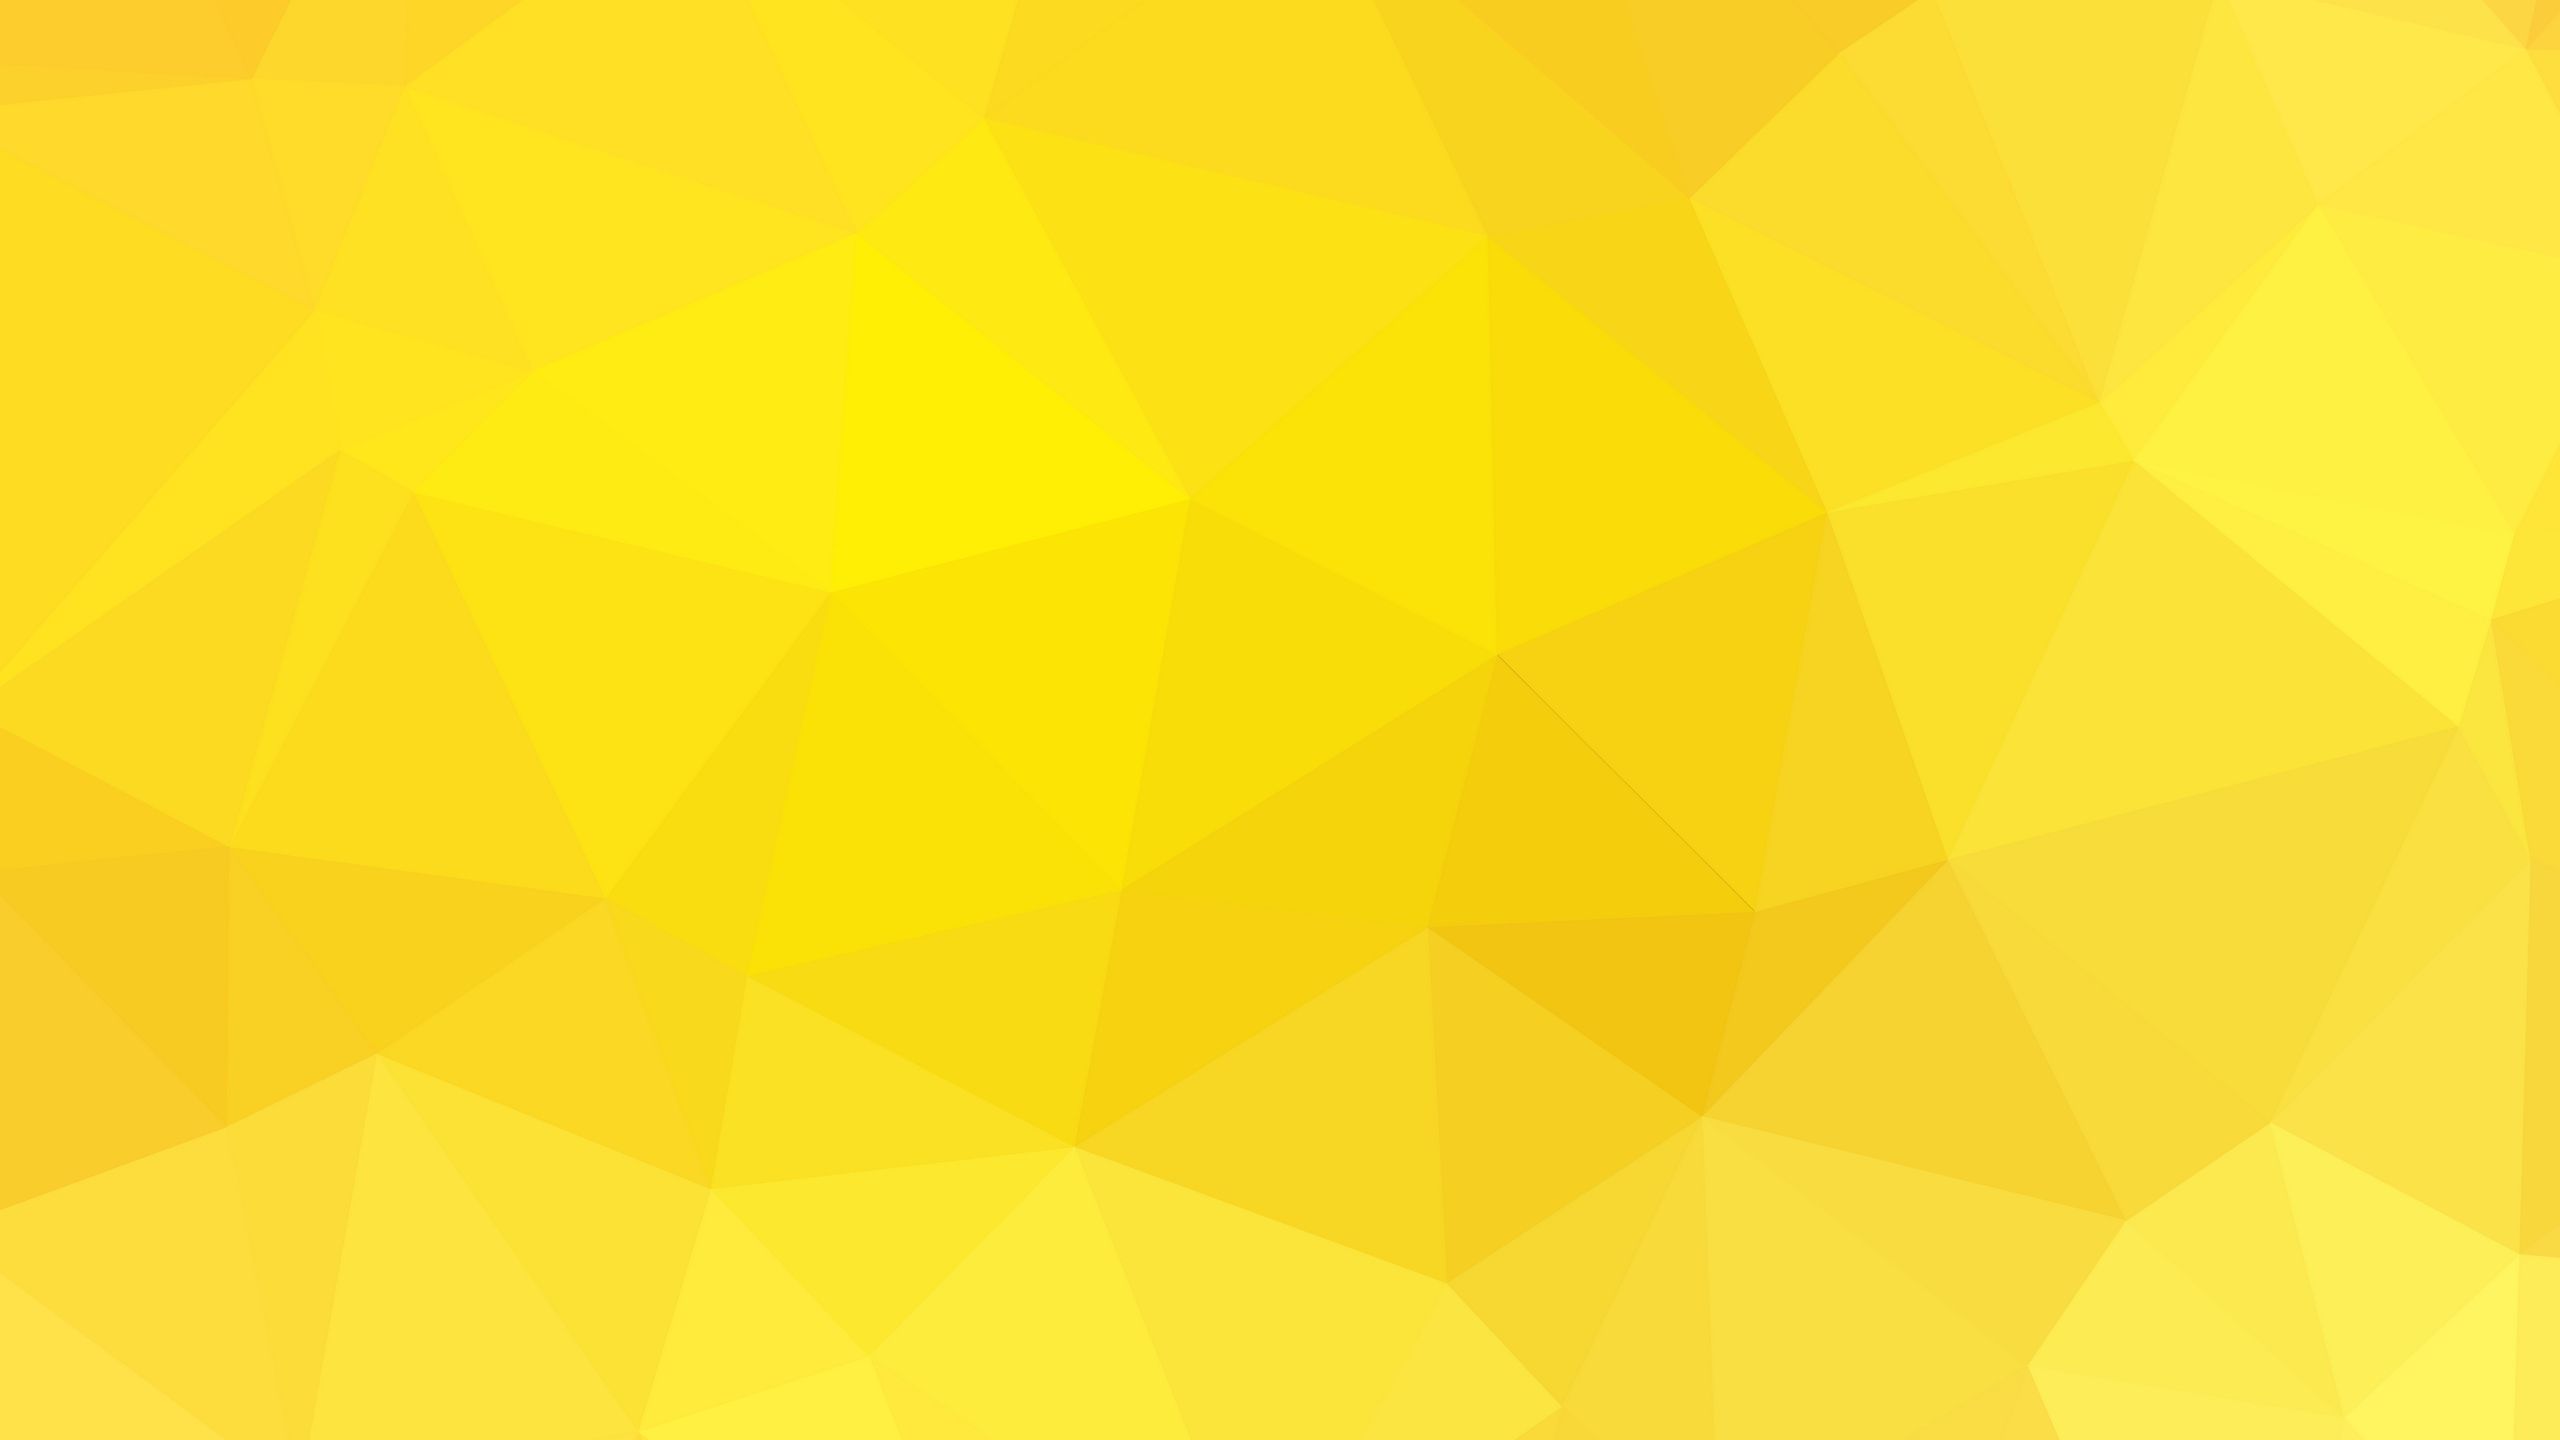 Download wallpaper 2560x1440 polygonal, triangles, shades, yellow